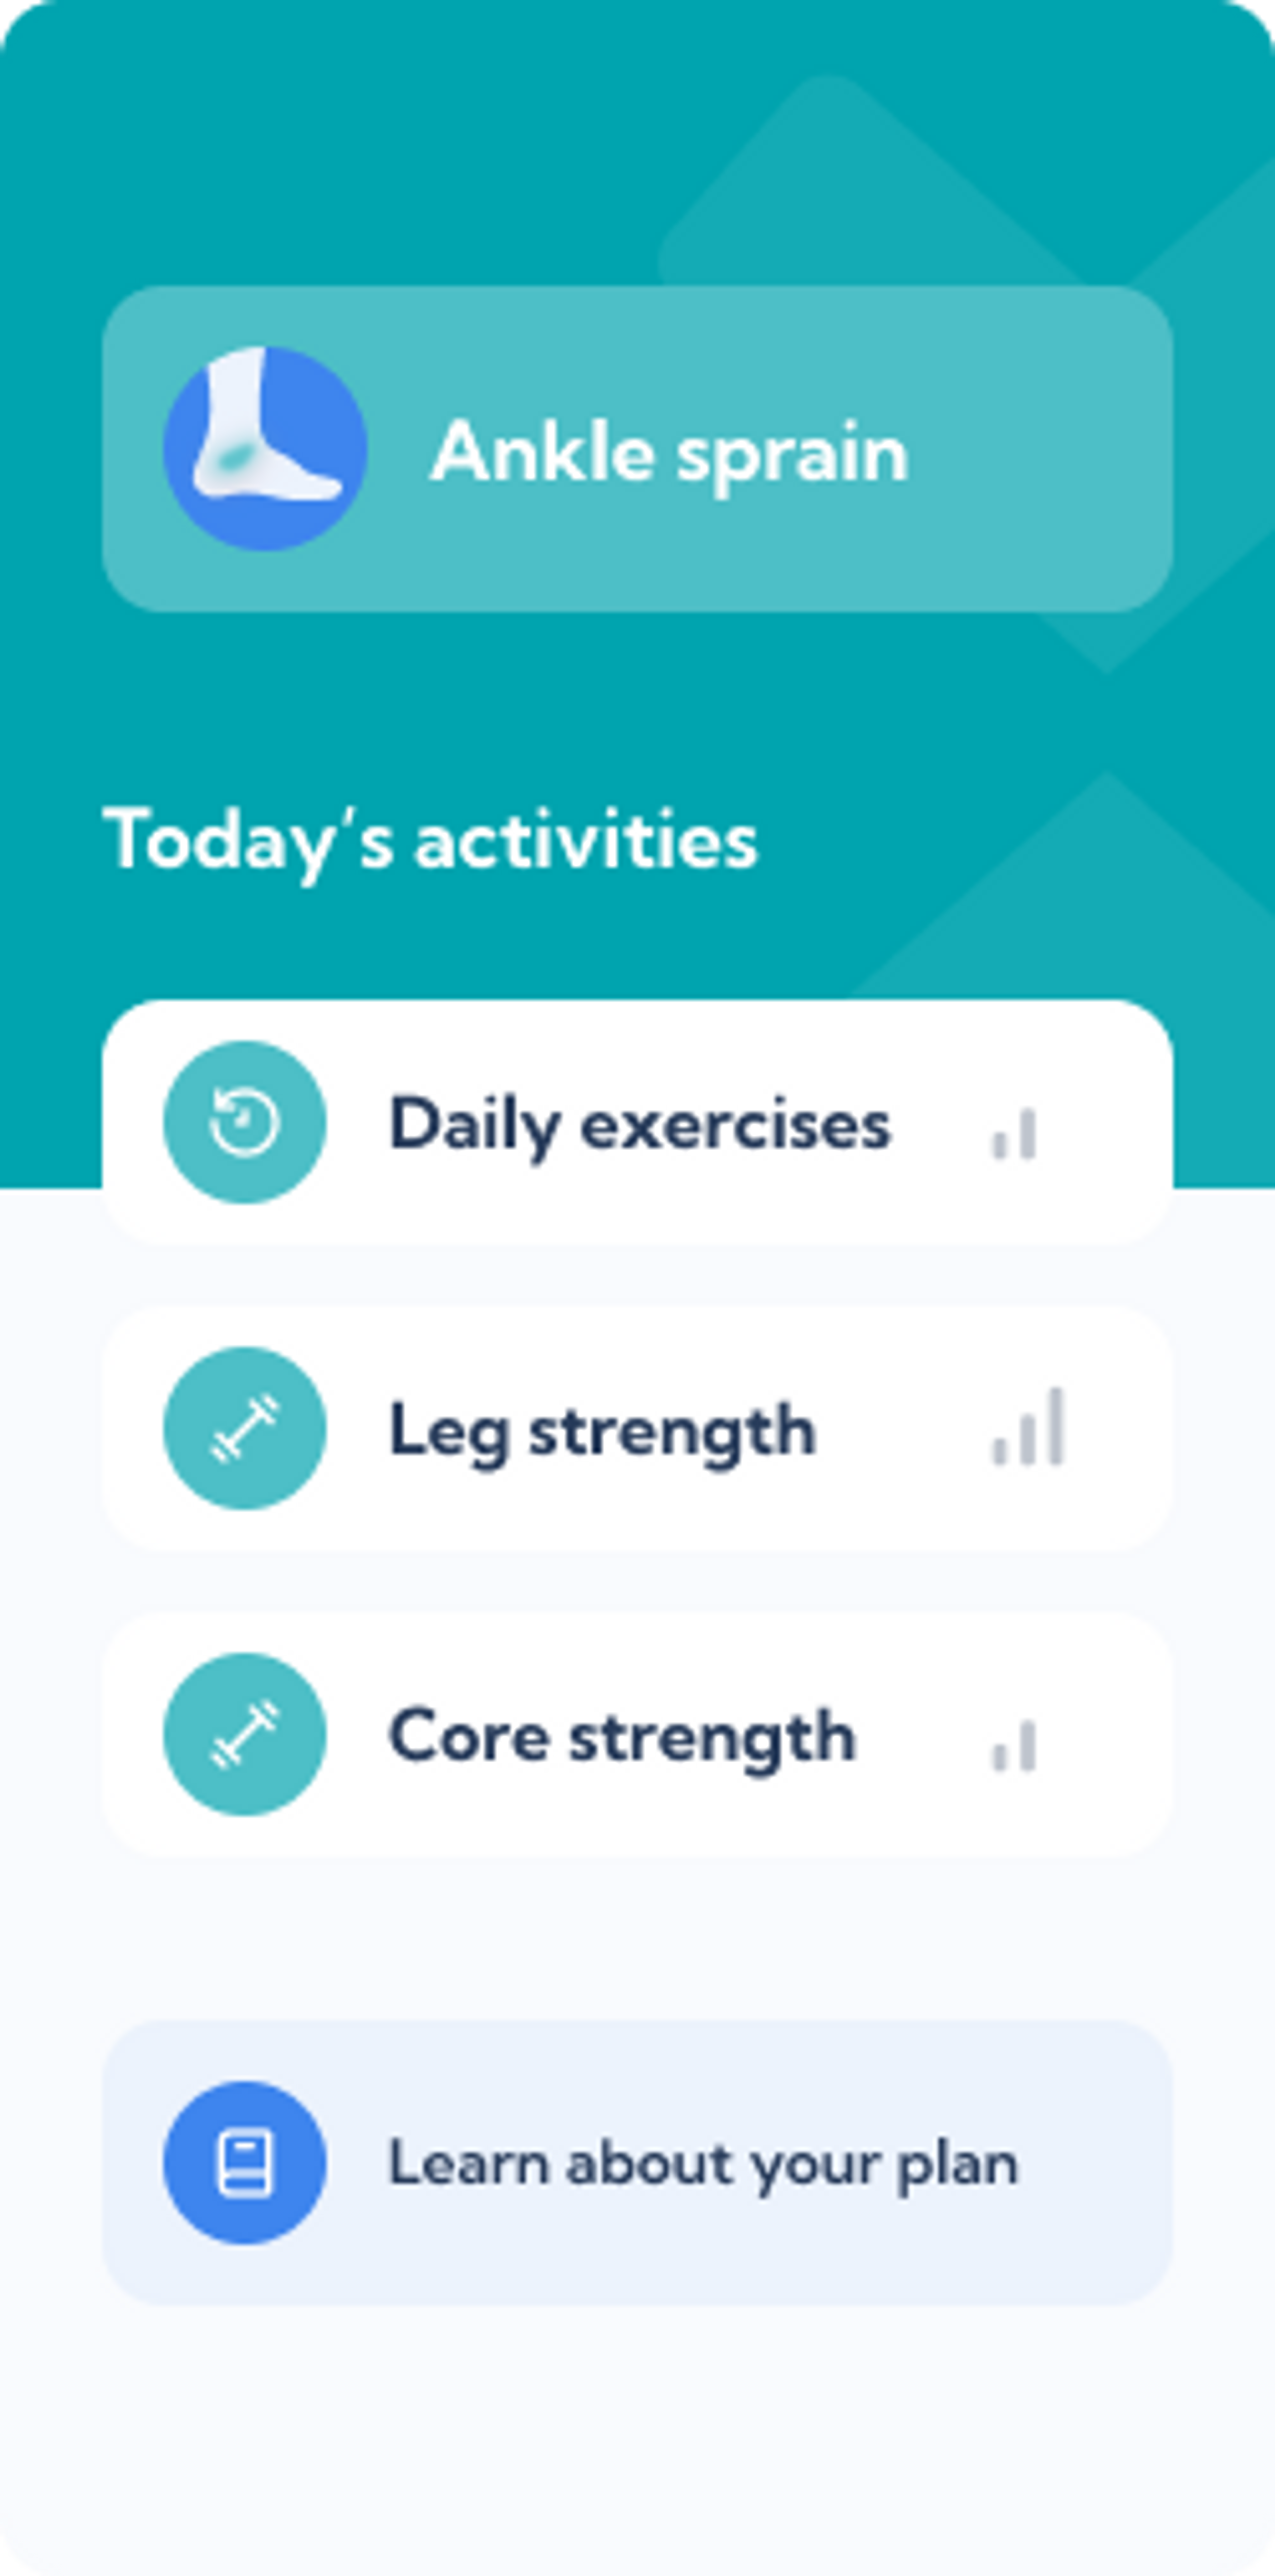 Ankle sprain rehab plan – Dashboard overview of the Exakt Health app